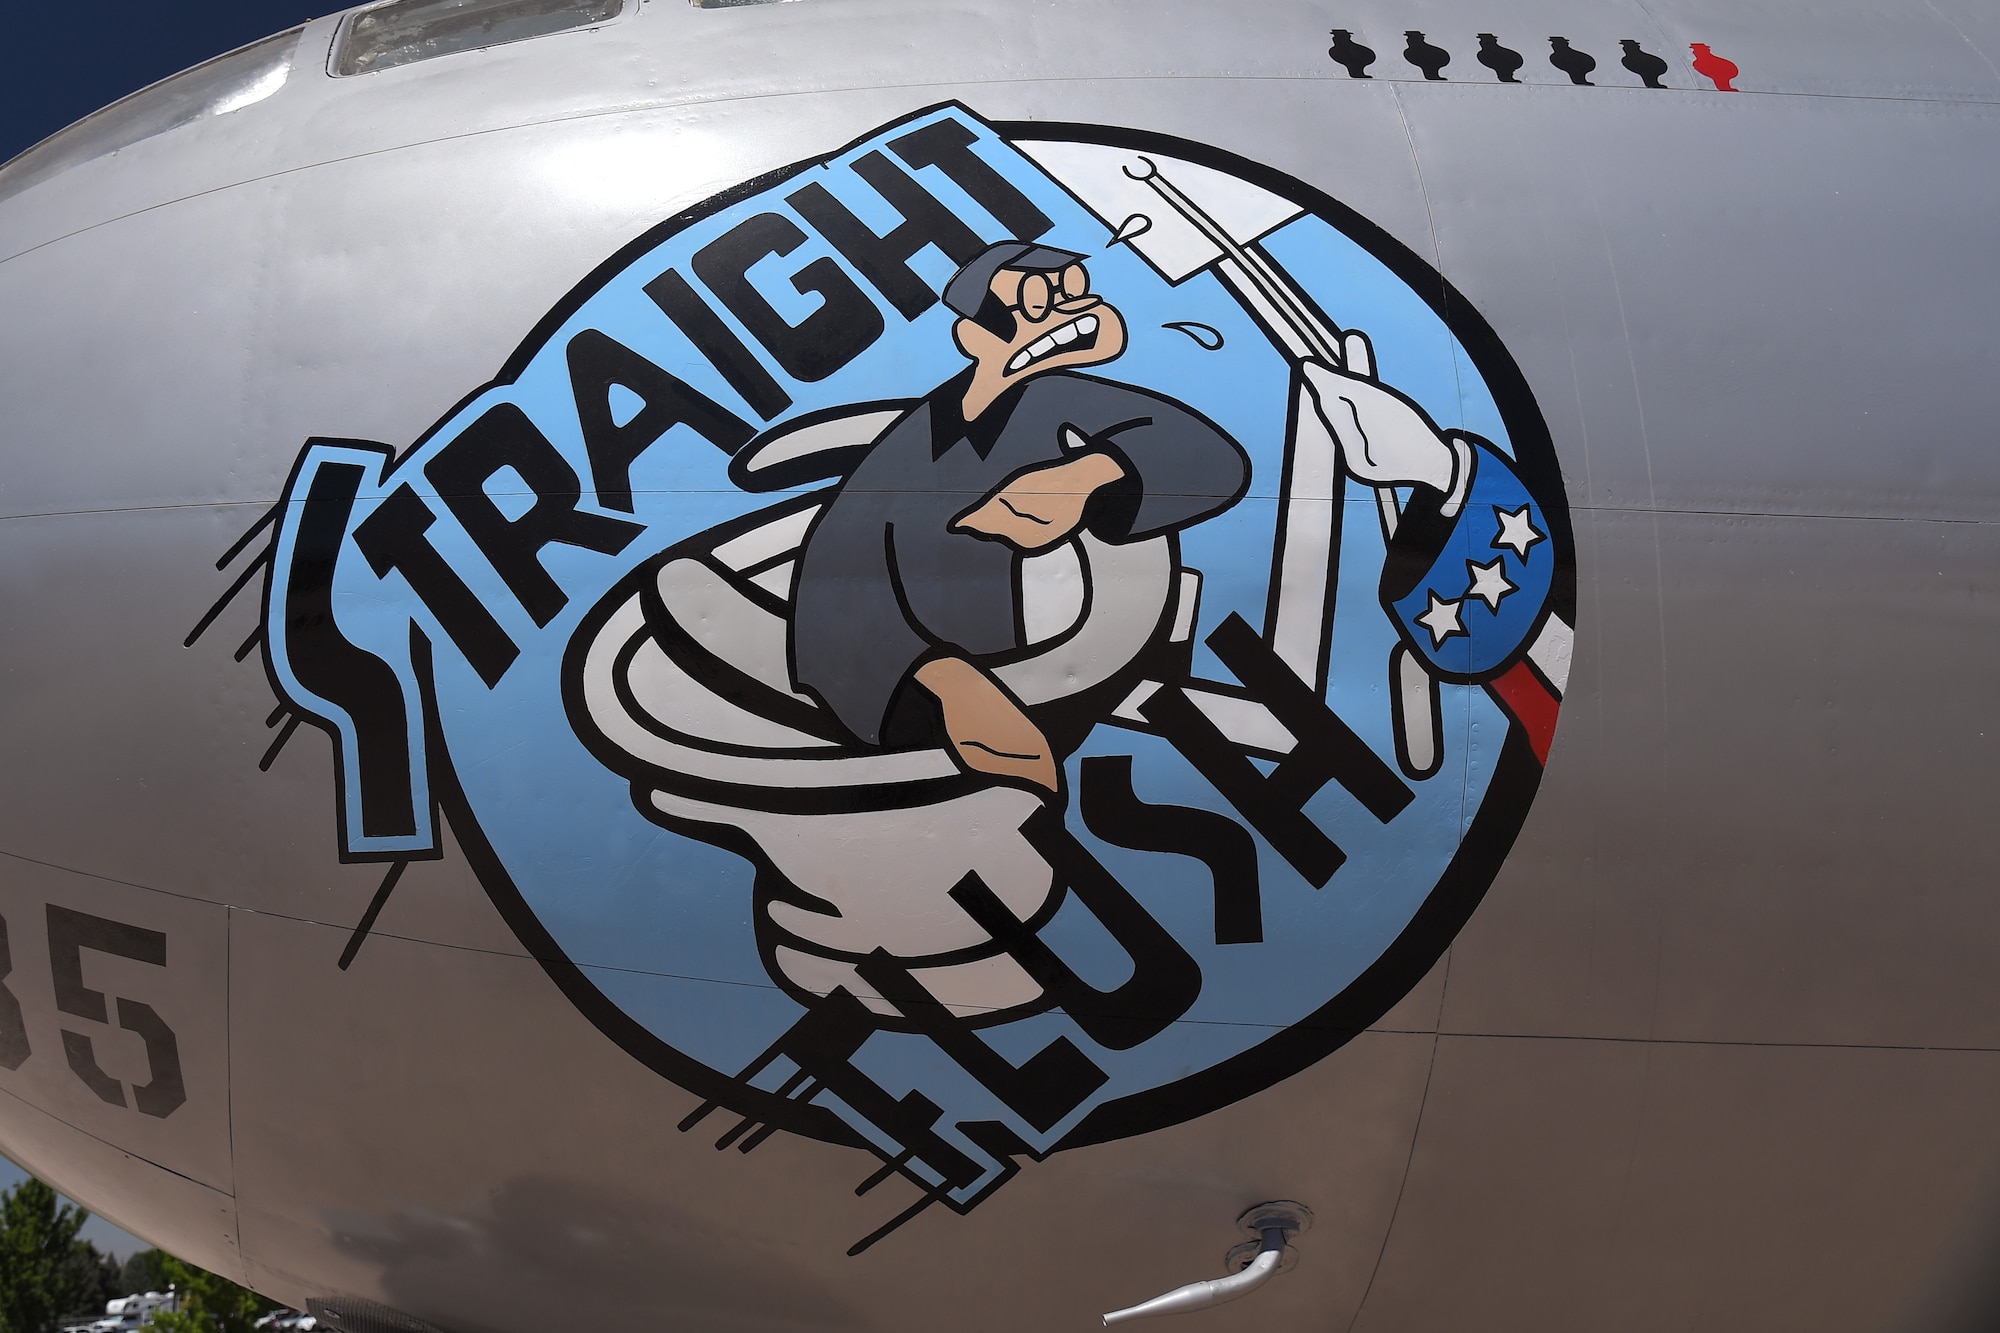 The nickname “Straight Flush” is decortated on the nose of a B-29 Stratofortress on display at the Hill Aerospace Museum Aug. 27, 2019, at Hill Air Force Base, Utah. Museum staff, volunteers and contractors completed a three-year exterior restoration of the aircraft this summer to preserve the airframe, as well as display markings and insignia to accurately represent a famed B-29 that trained for top secret operations from Wendover Field during World War II. (U.S Air Force photo by Todd Cromar)